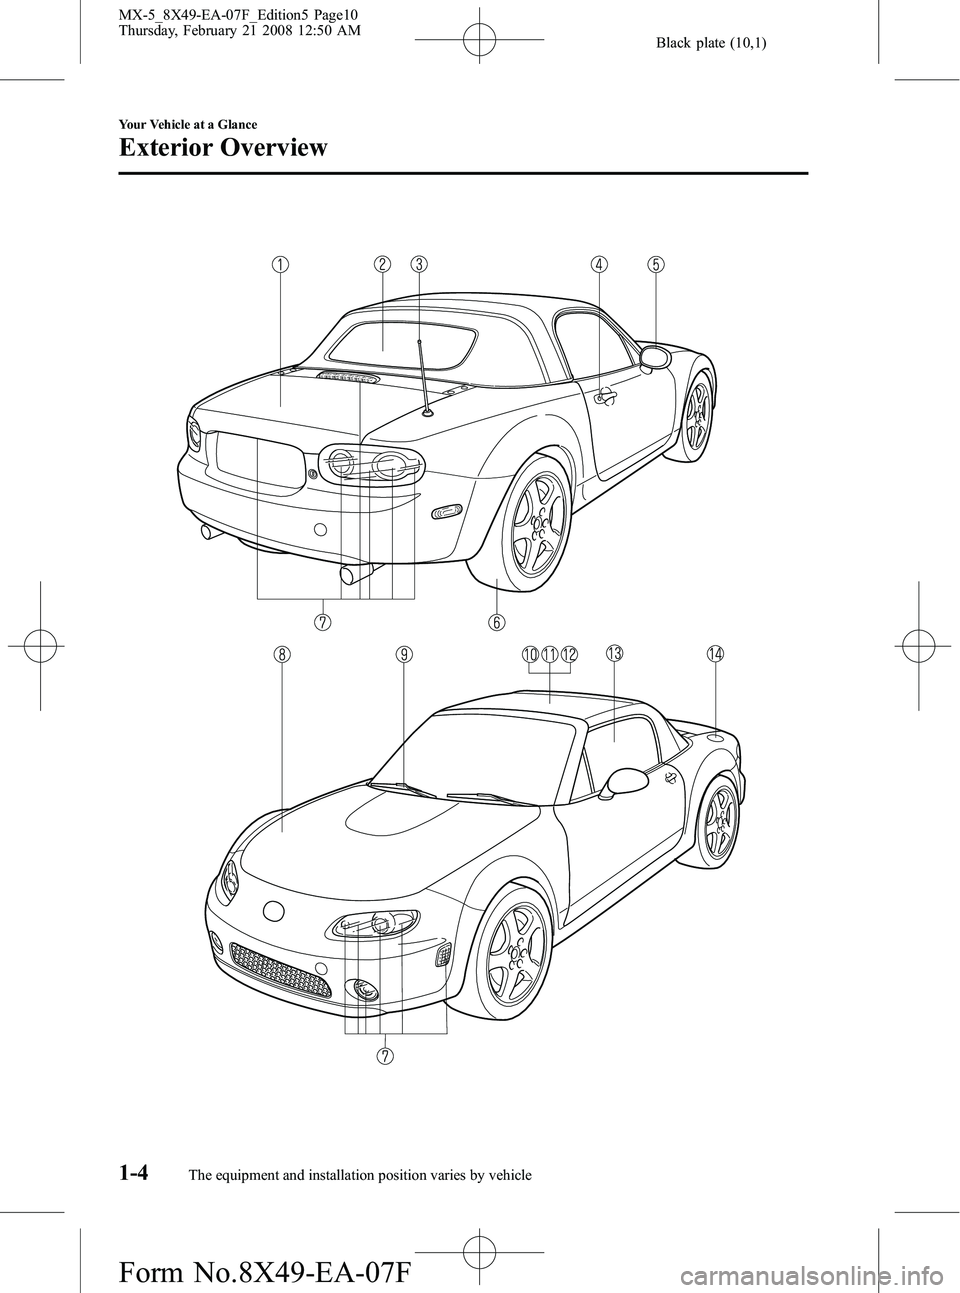 MAZDA MODEL MX-5 MIATA POWER RETRACTABLE HARDTOP 2008  Owners Manual Black plate (10,1)
1-4
Your Vehicle at a Glance
The equipment and installation position varies by vehicle
Exterior Overview
MX-5_8X49-EA-07F_Edition5 Page10
Thursday, February 21 2008 12:50 AM
Form No